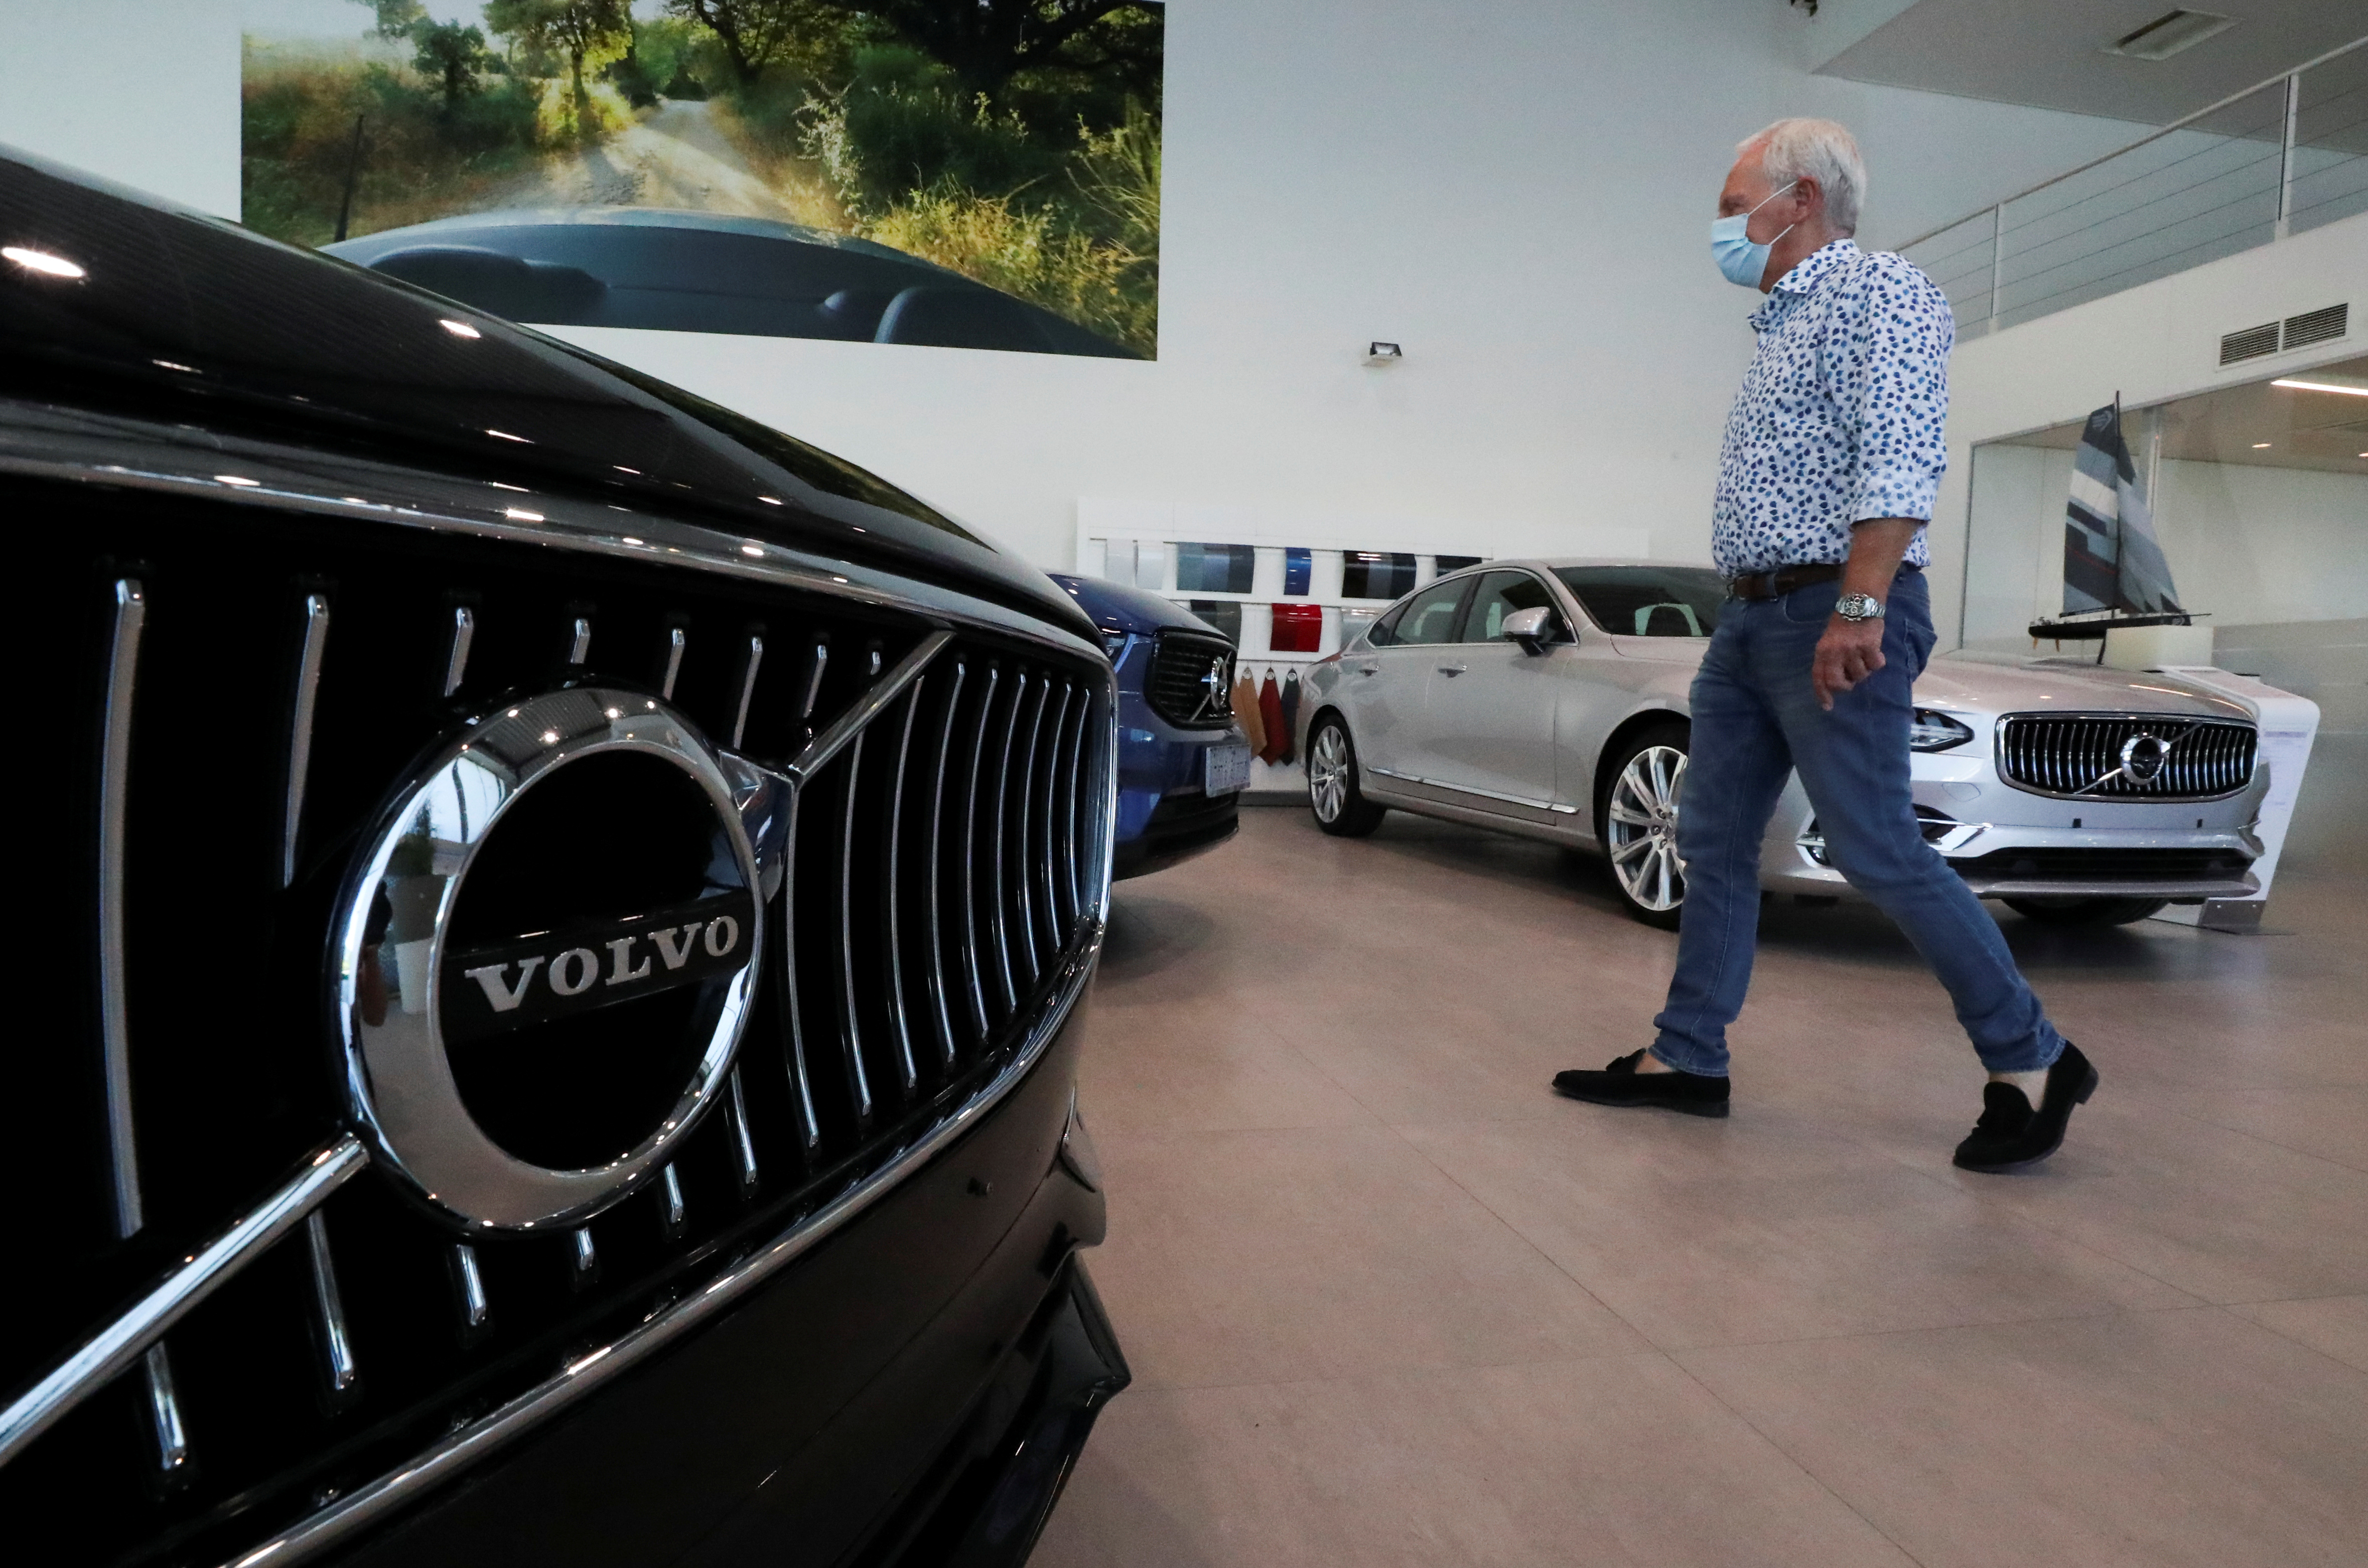 An employee at a Volvo car dealer wearing a protective mask is seen in the show room, amid the coronavirus disease (COVID-19) outbreak in Brussels